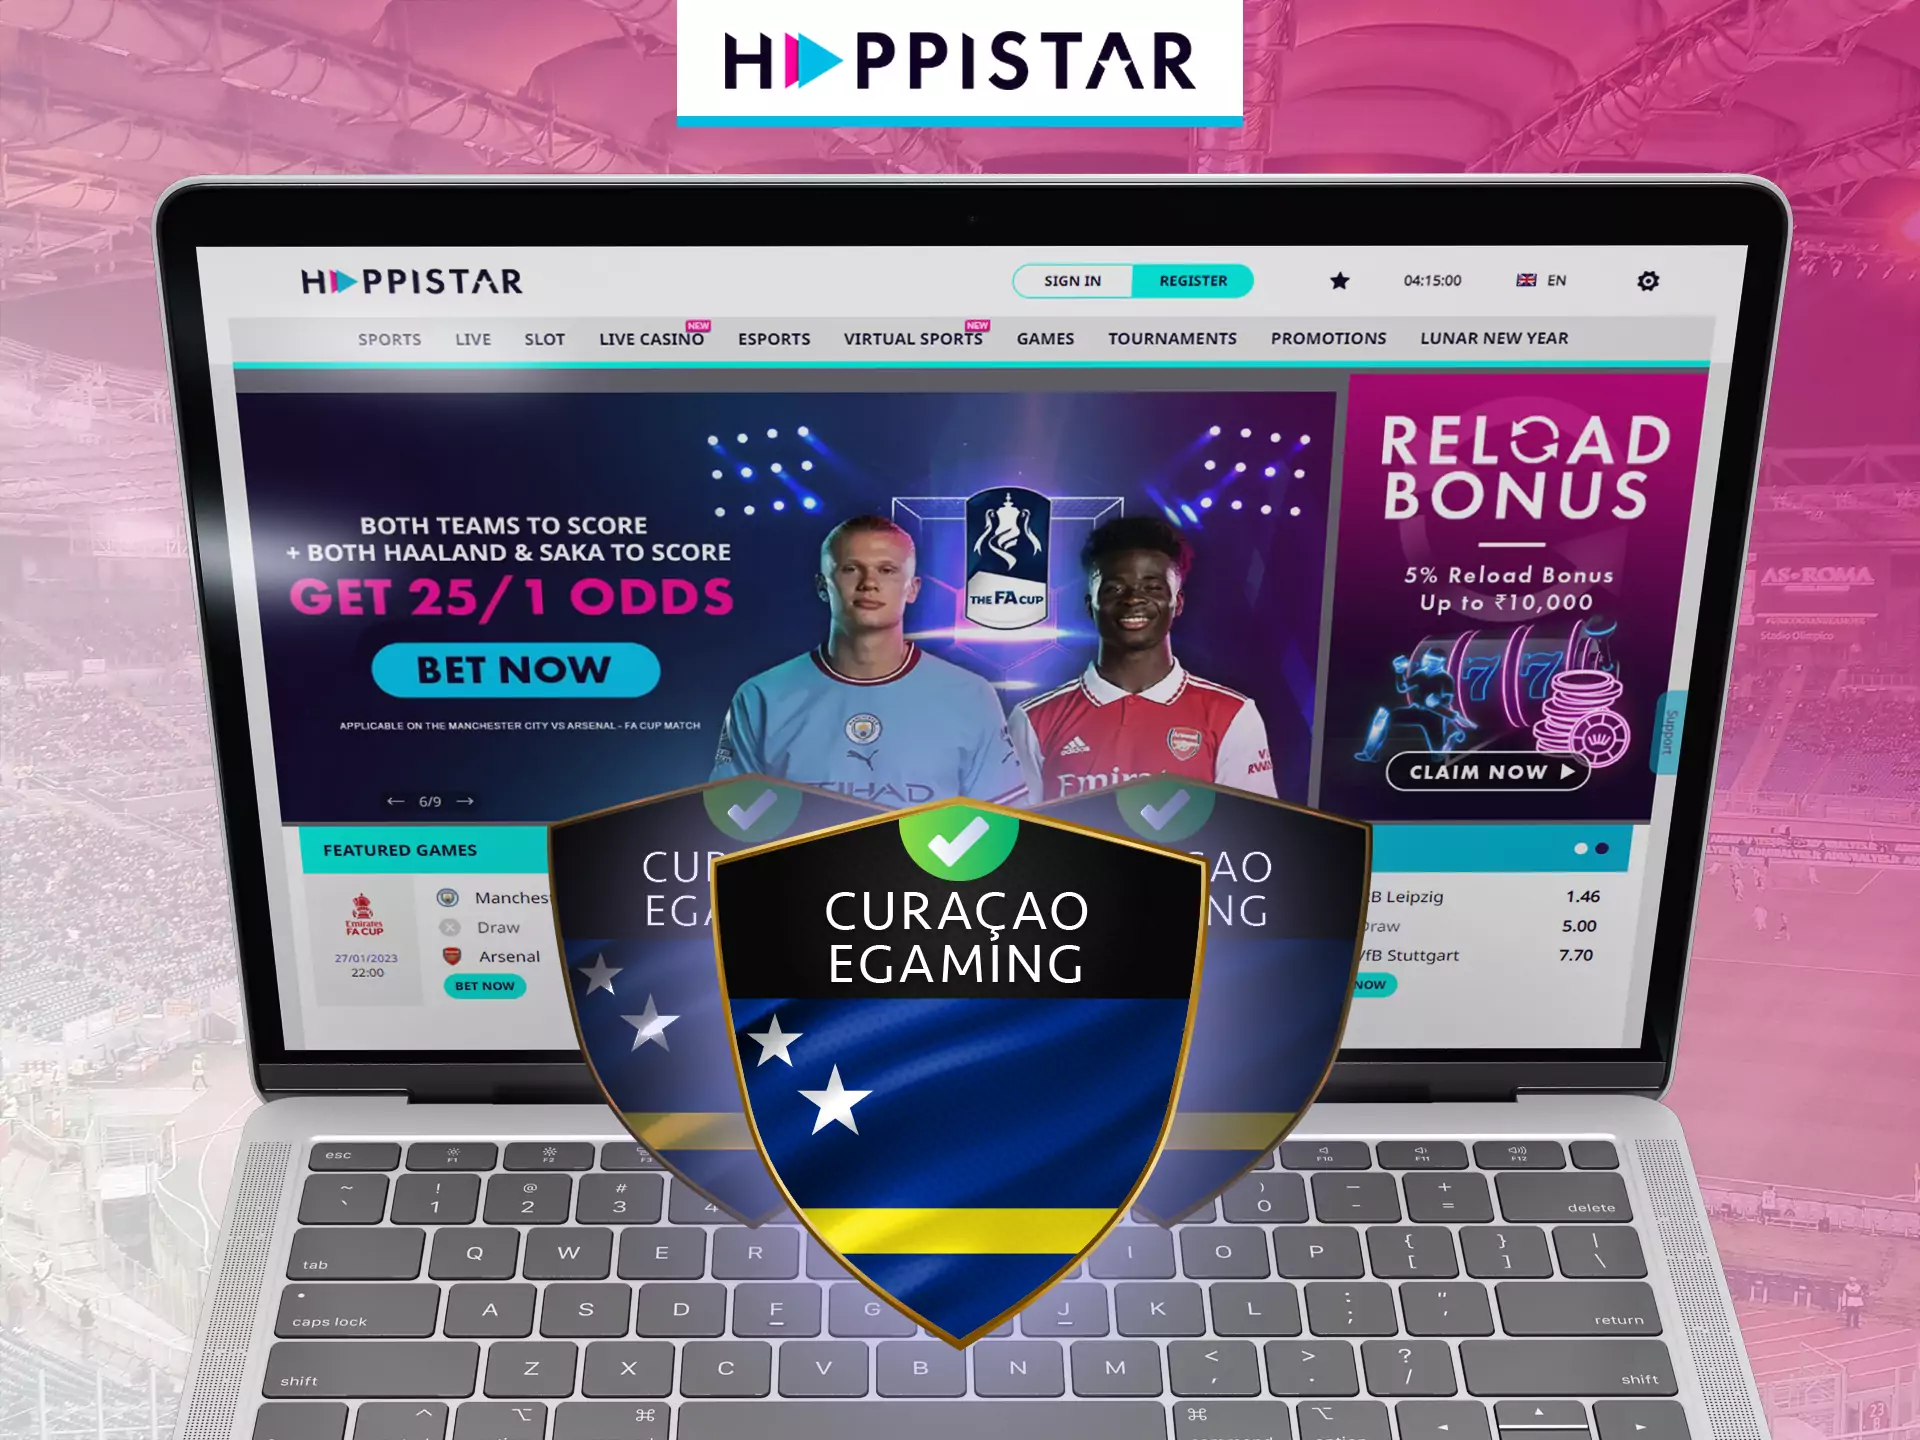 The Happistar website works with a Curacao license.